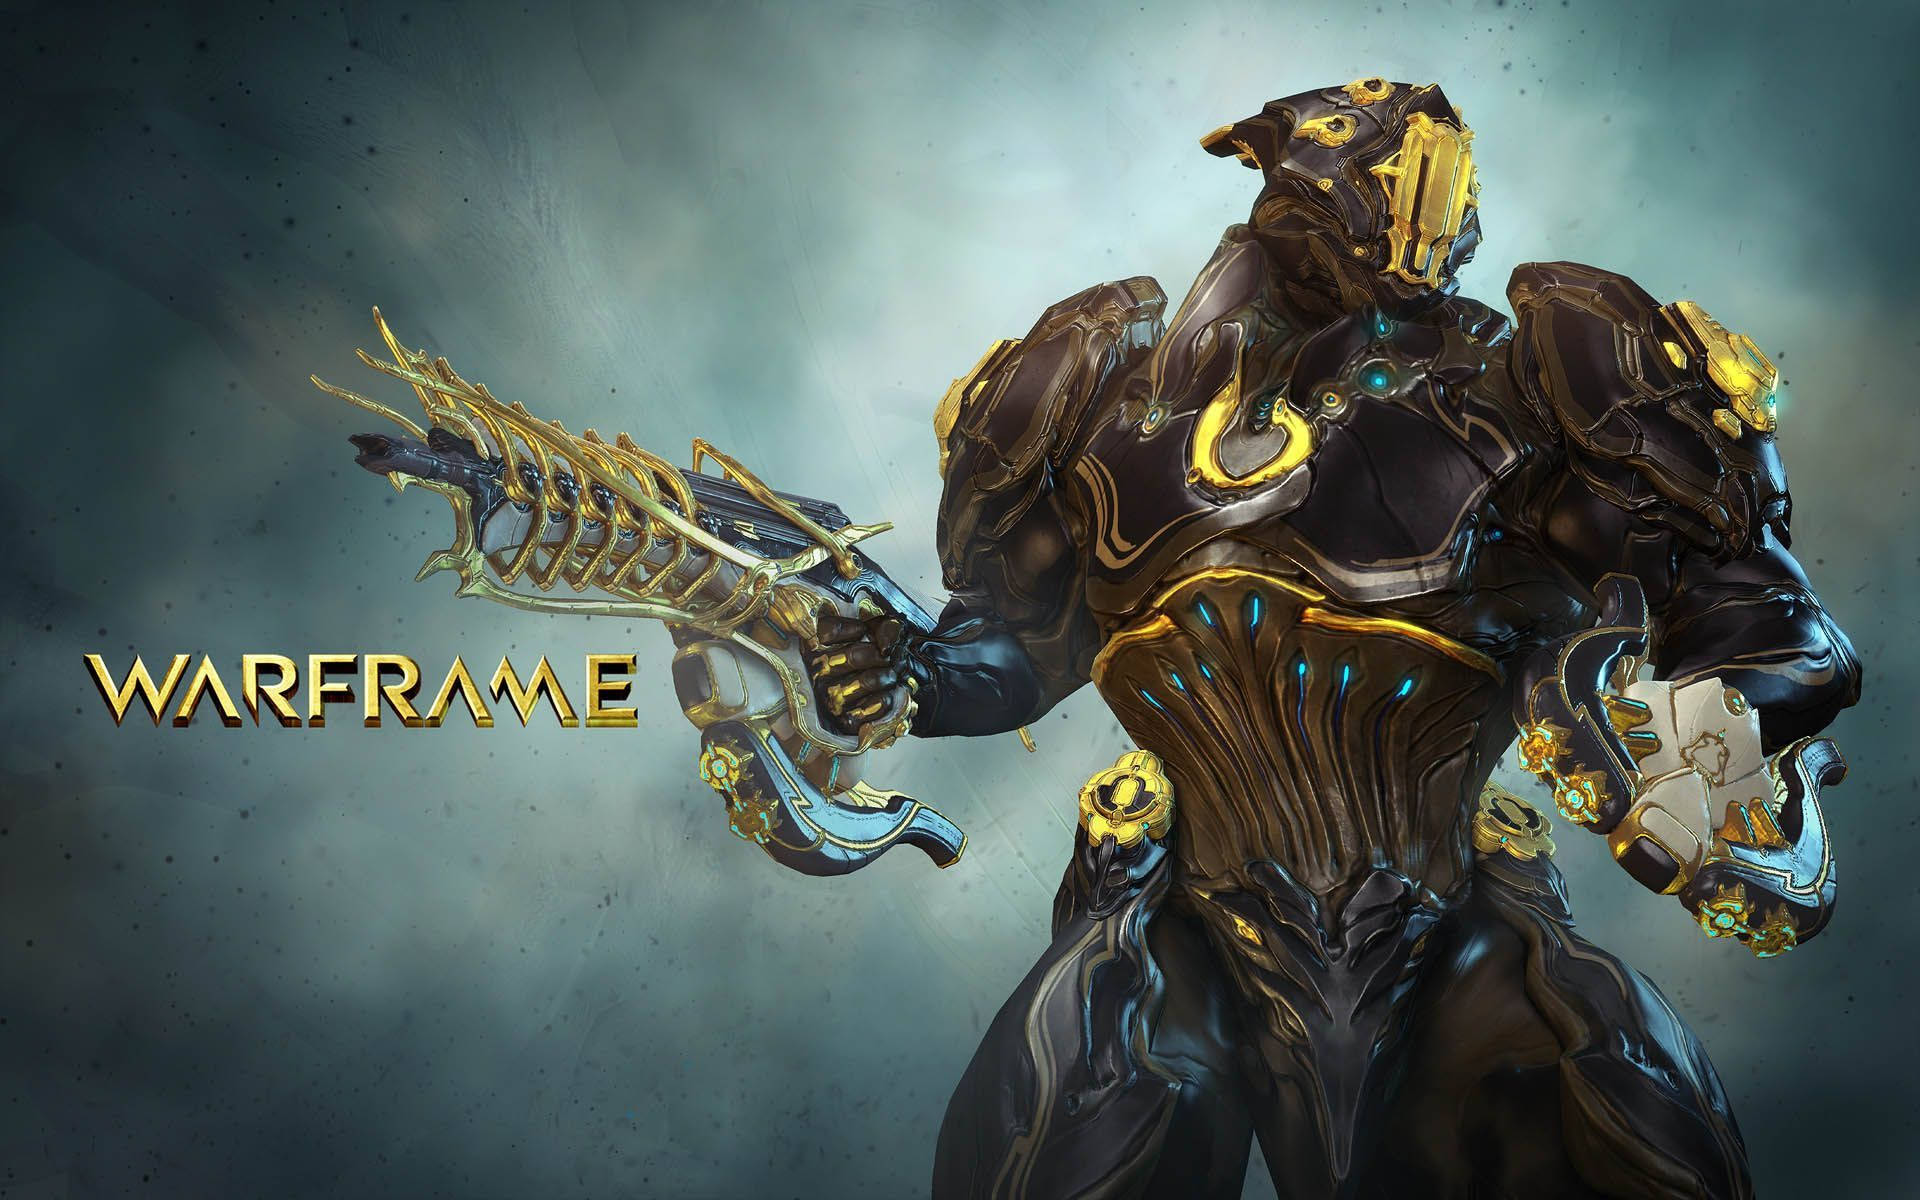 "The Tenno Soldier and Rhino, Ready to Unify and Protect in Warframe" Wallpaper